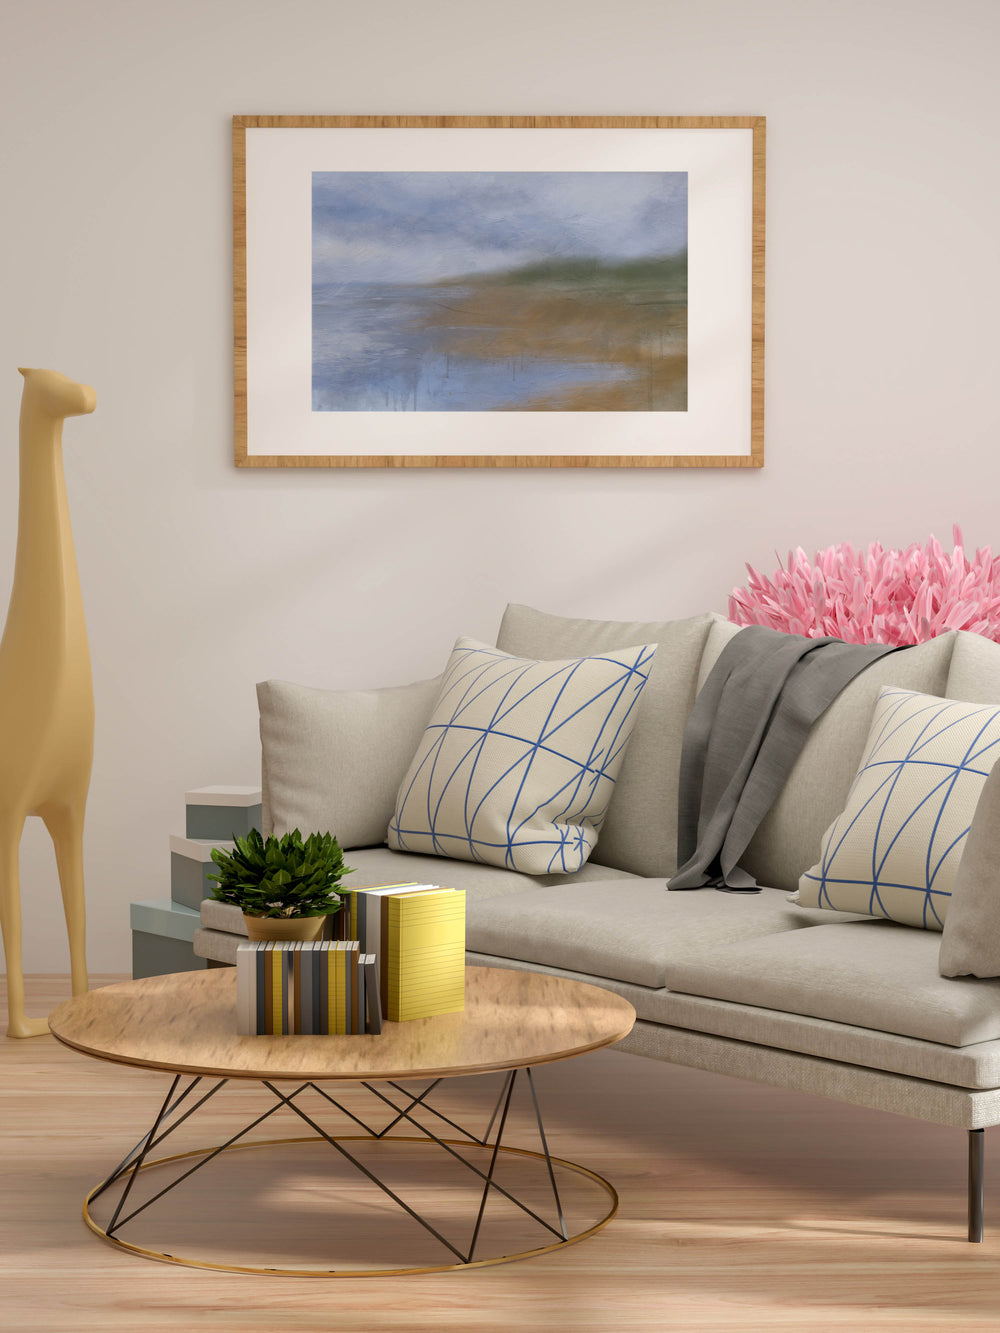 Abstract Landscape Painting in Living Area